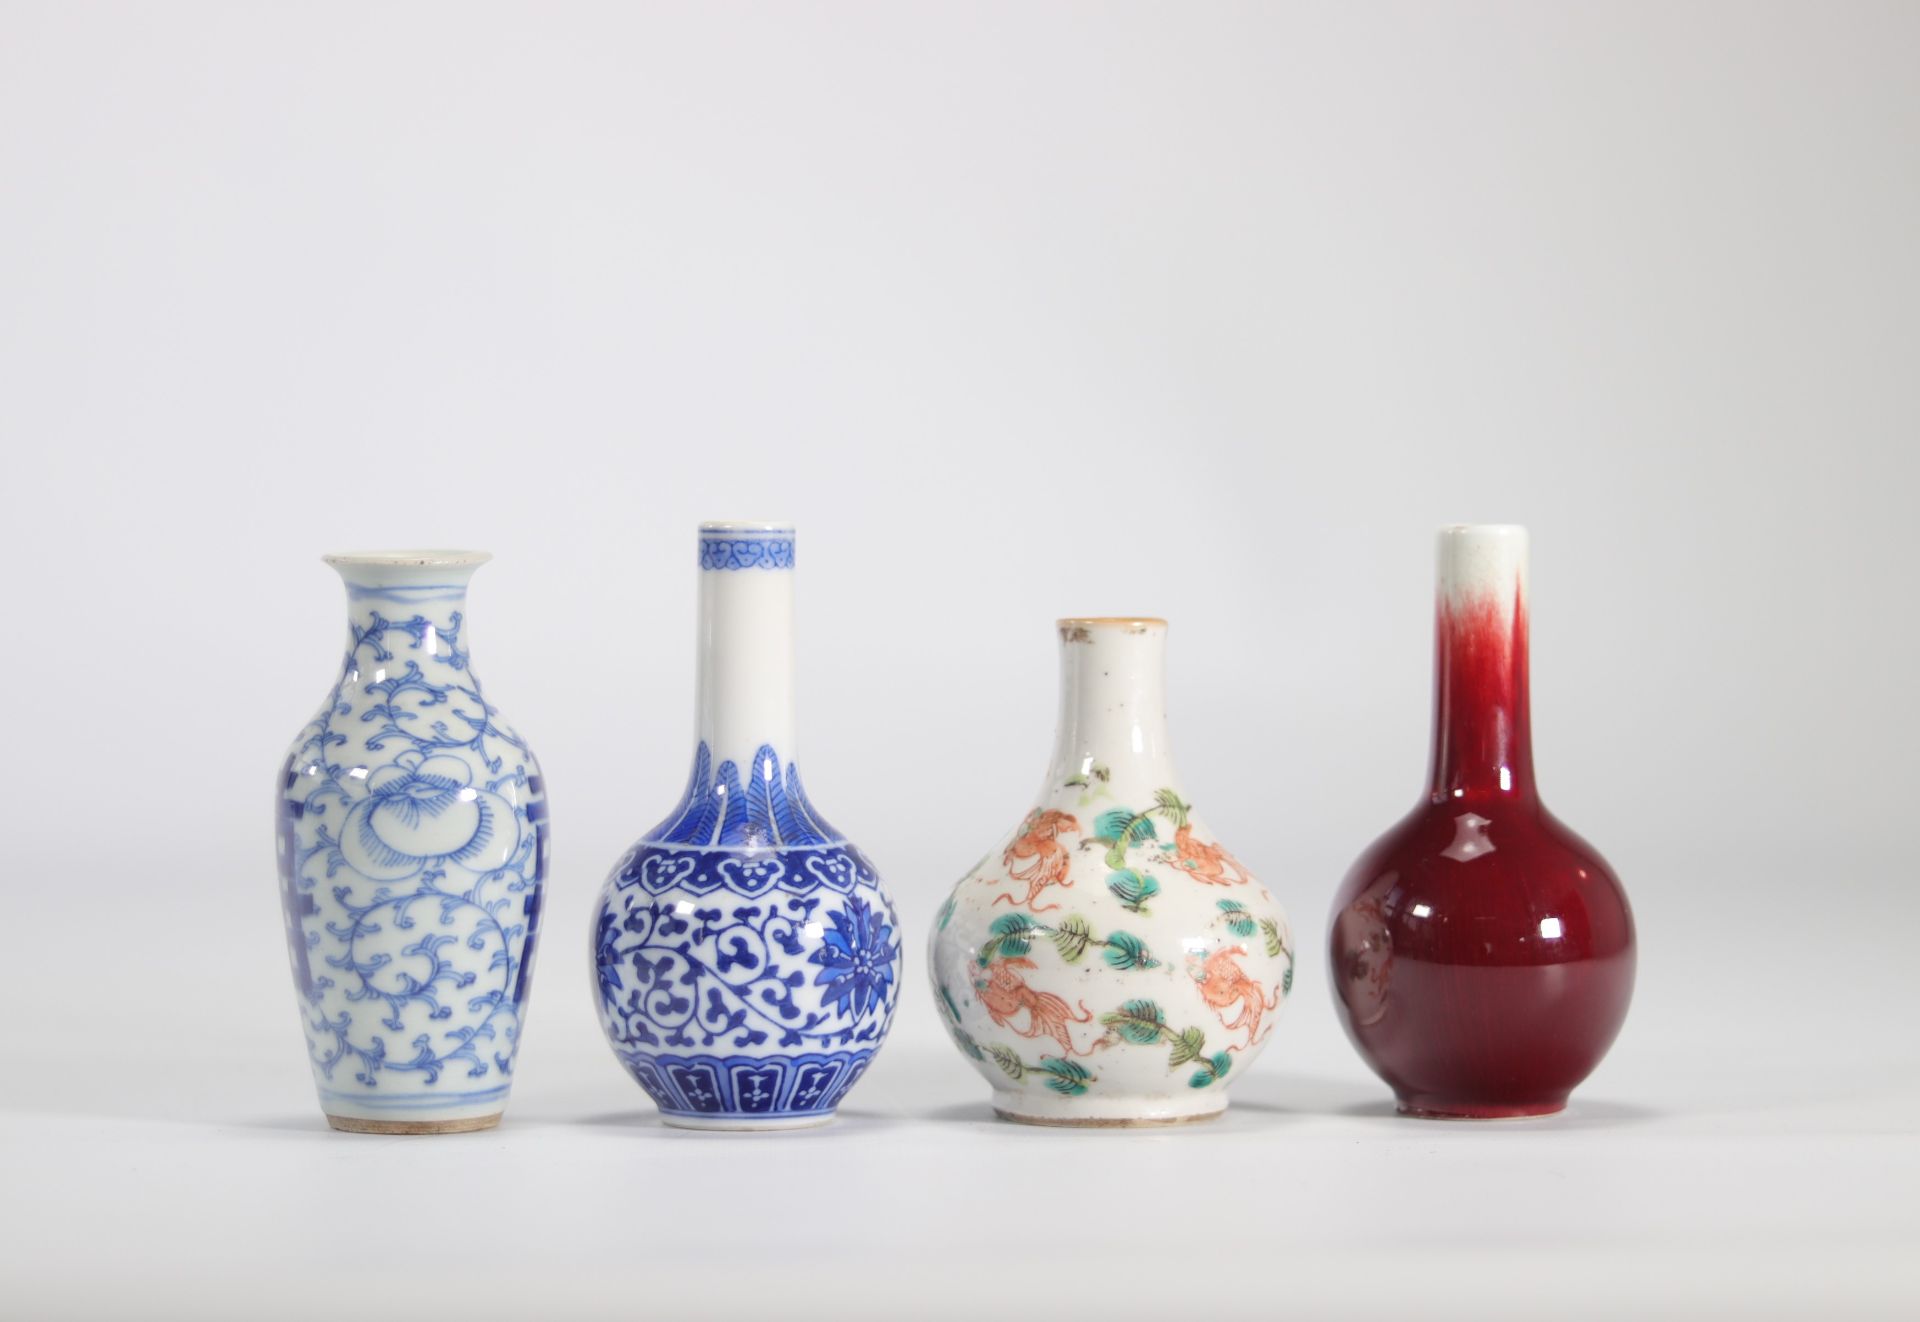 (4) Set of porcelain vases in white, blue and oxblood from Qing period (æ¸…æœ) - Image 2 of 3